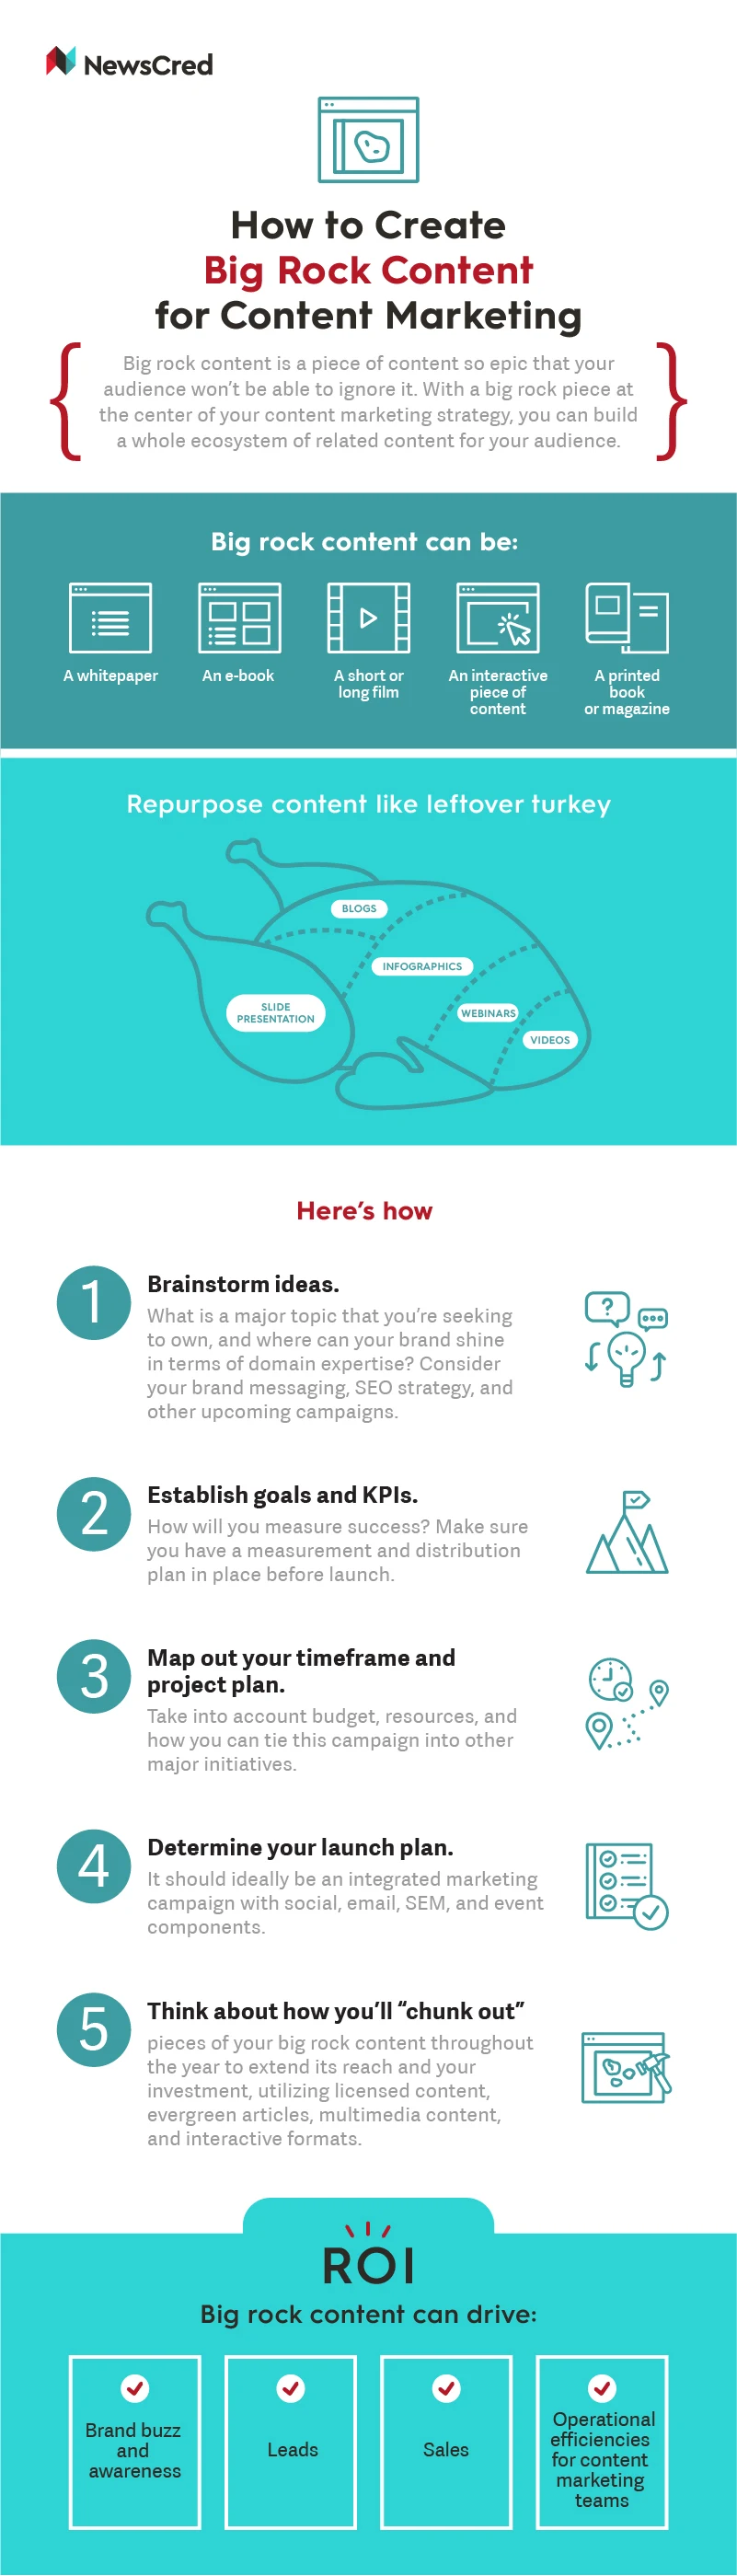 INFOGRAPHIC: How to Create Big Rock Content for Content Marketing